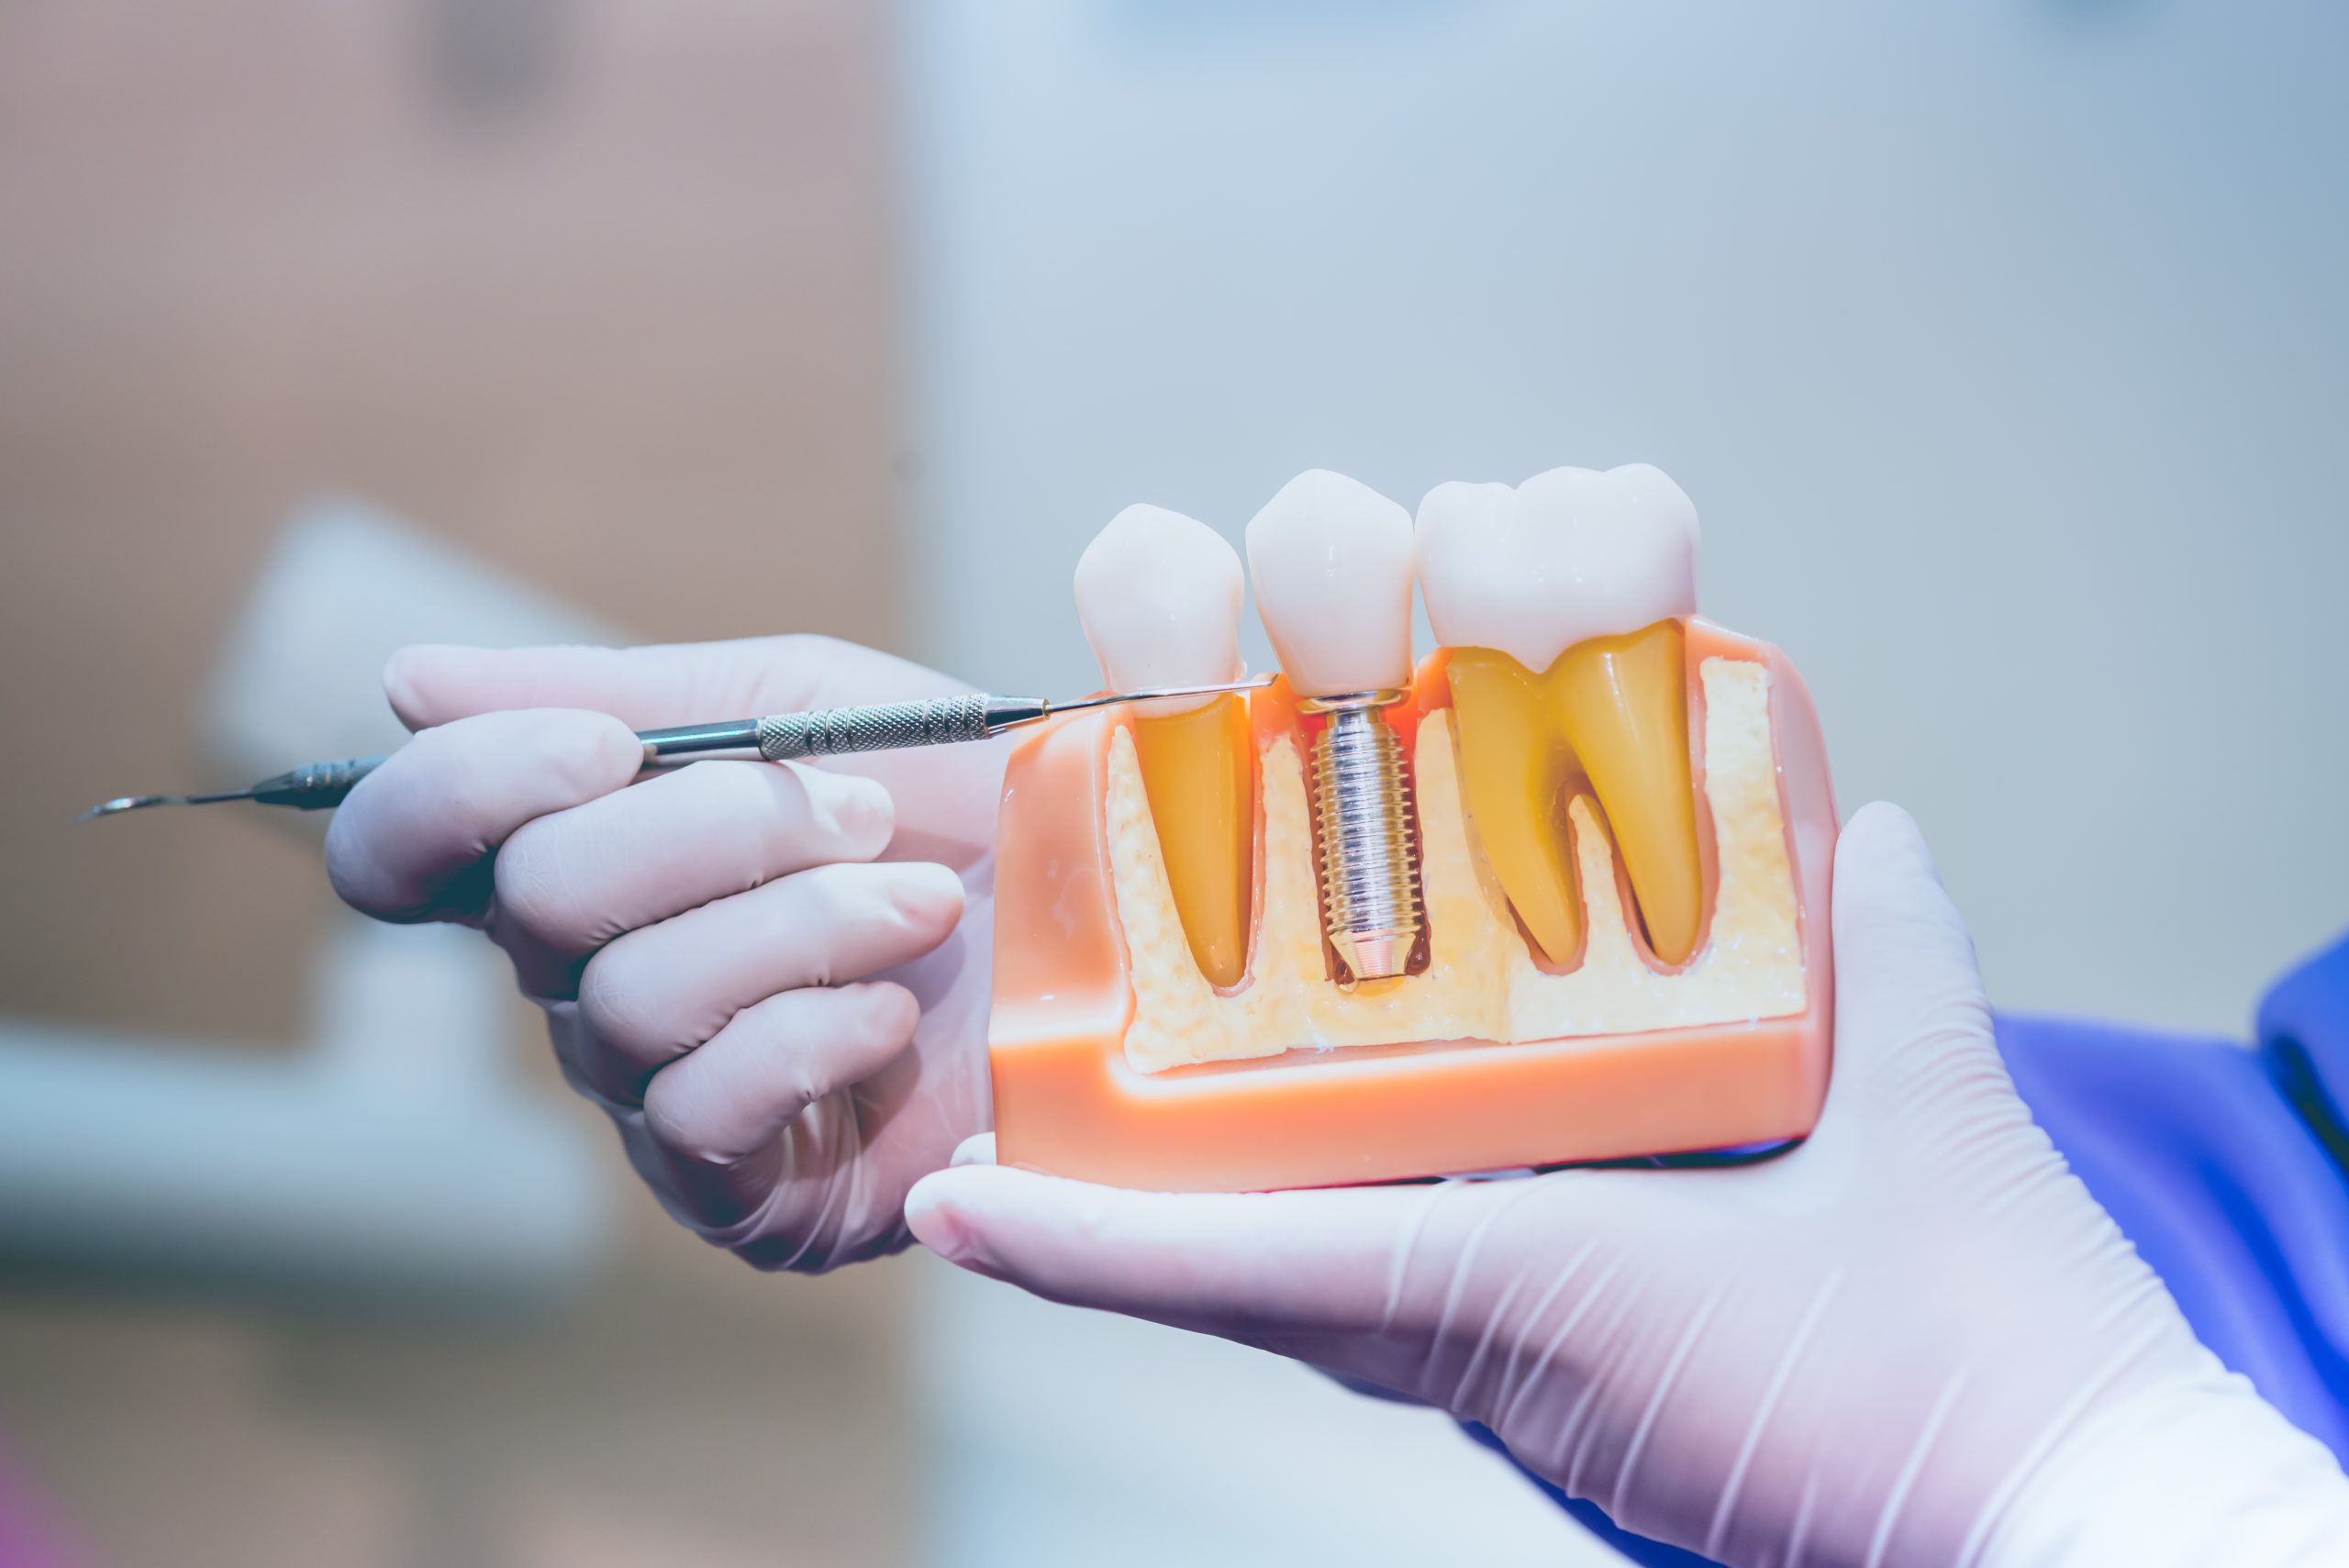 Dental implants from your dentist in rapid city